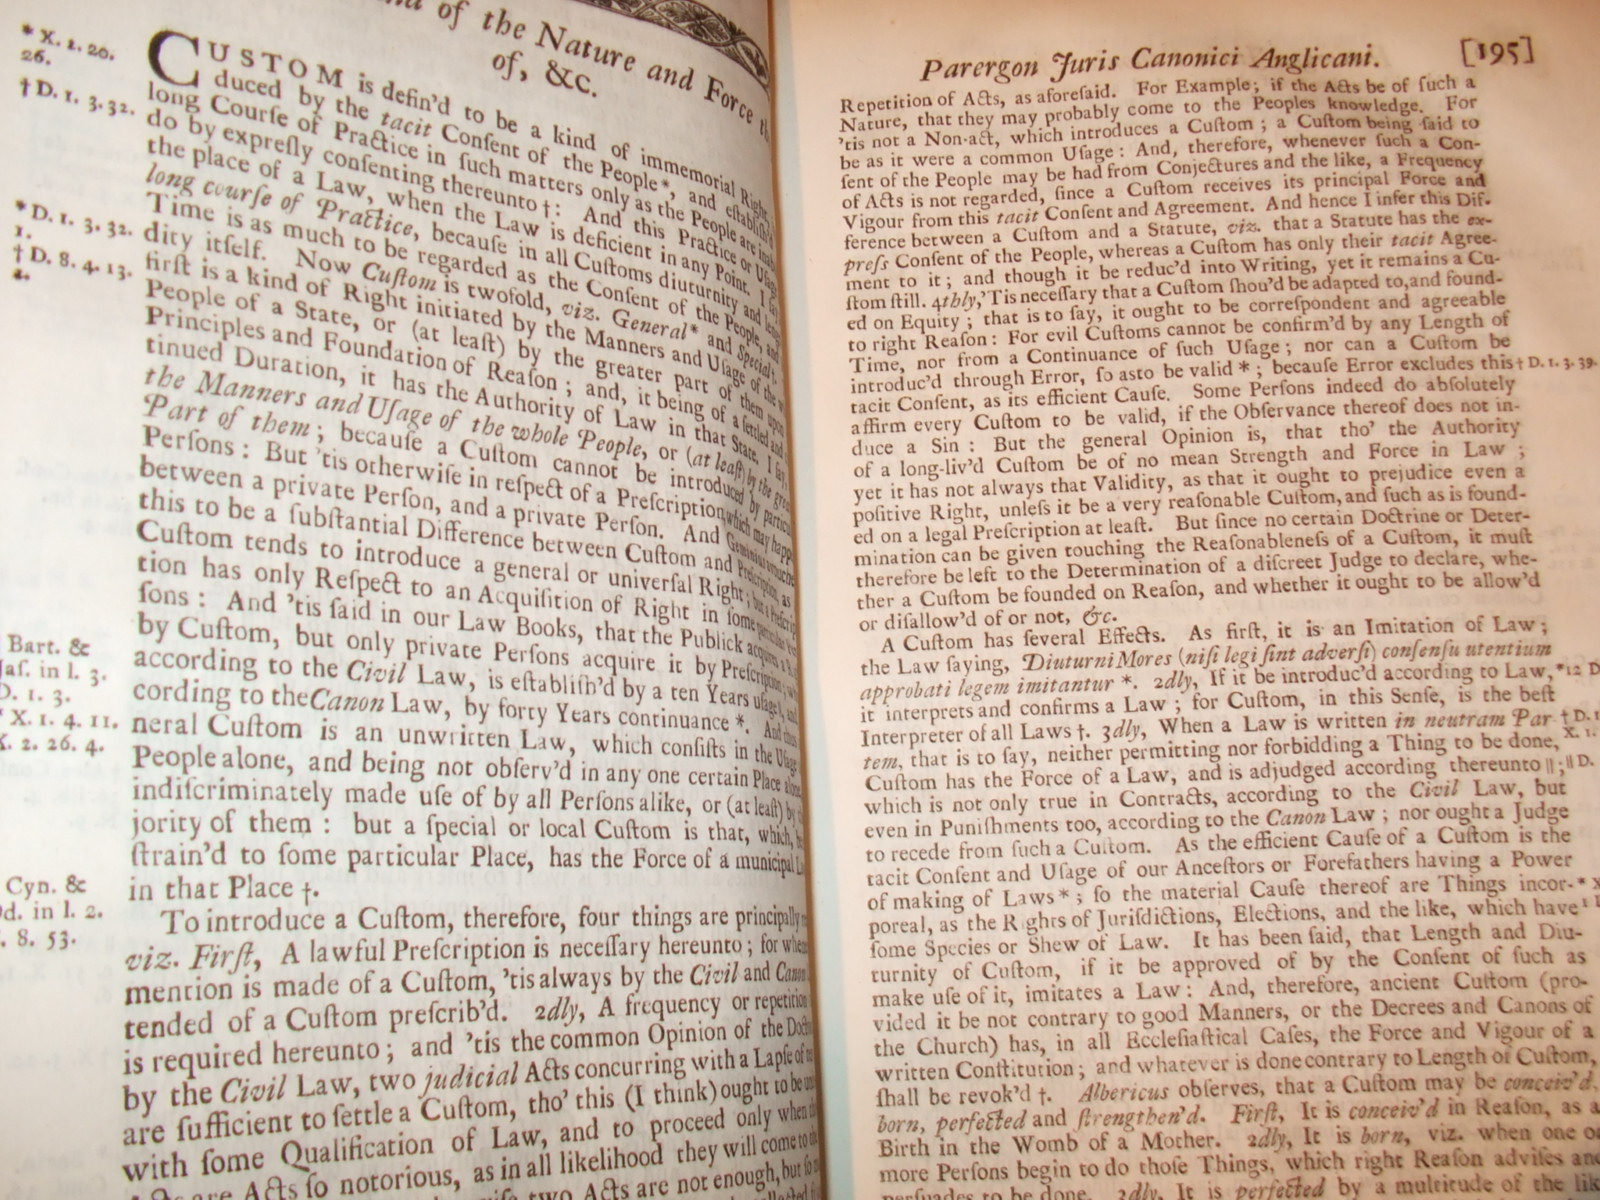 Image for Parergon Juris Canonici Anglicani, Or, A Commentary By Way of Supplement to the Canons and Constitutions of the Church of England: Not Only from the Books of the Canon and Civil Law, But Likewise from the Statute and Common Law of this Realm